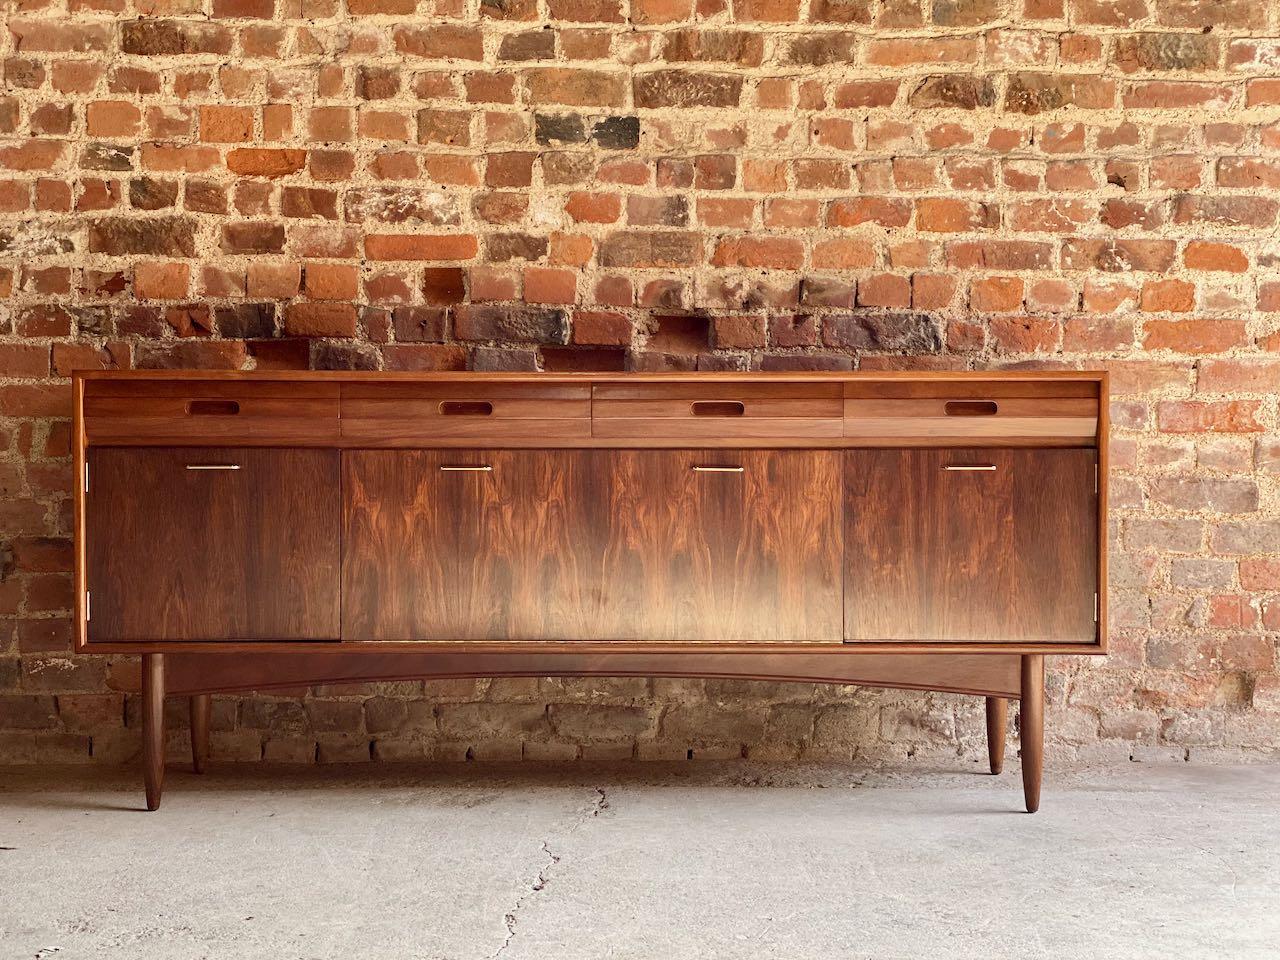 White & Newton of Portsmouth African Teak & Rosewood sideboard 1960s

Magnificent midcentury White & Newton of Portsmouth African teak (Afromosia) and rosewood sideboard credenza, made in the UK in the 1960s, the rectangular teak top over four